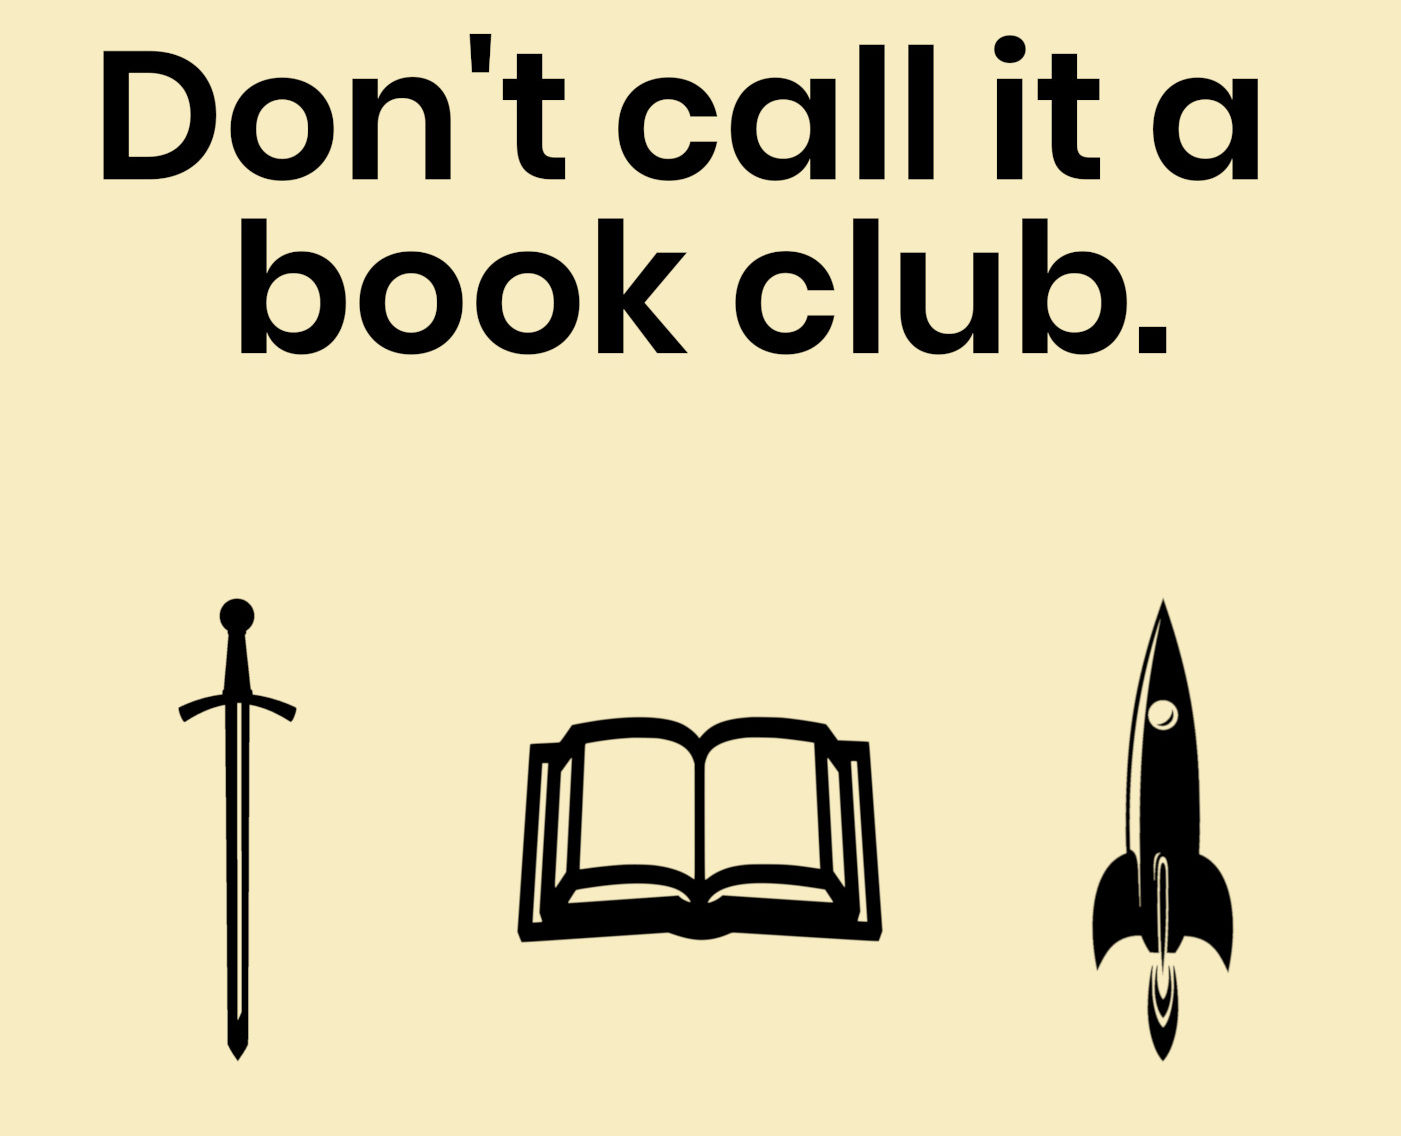 Logo for Don't call it a book club.